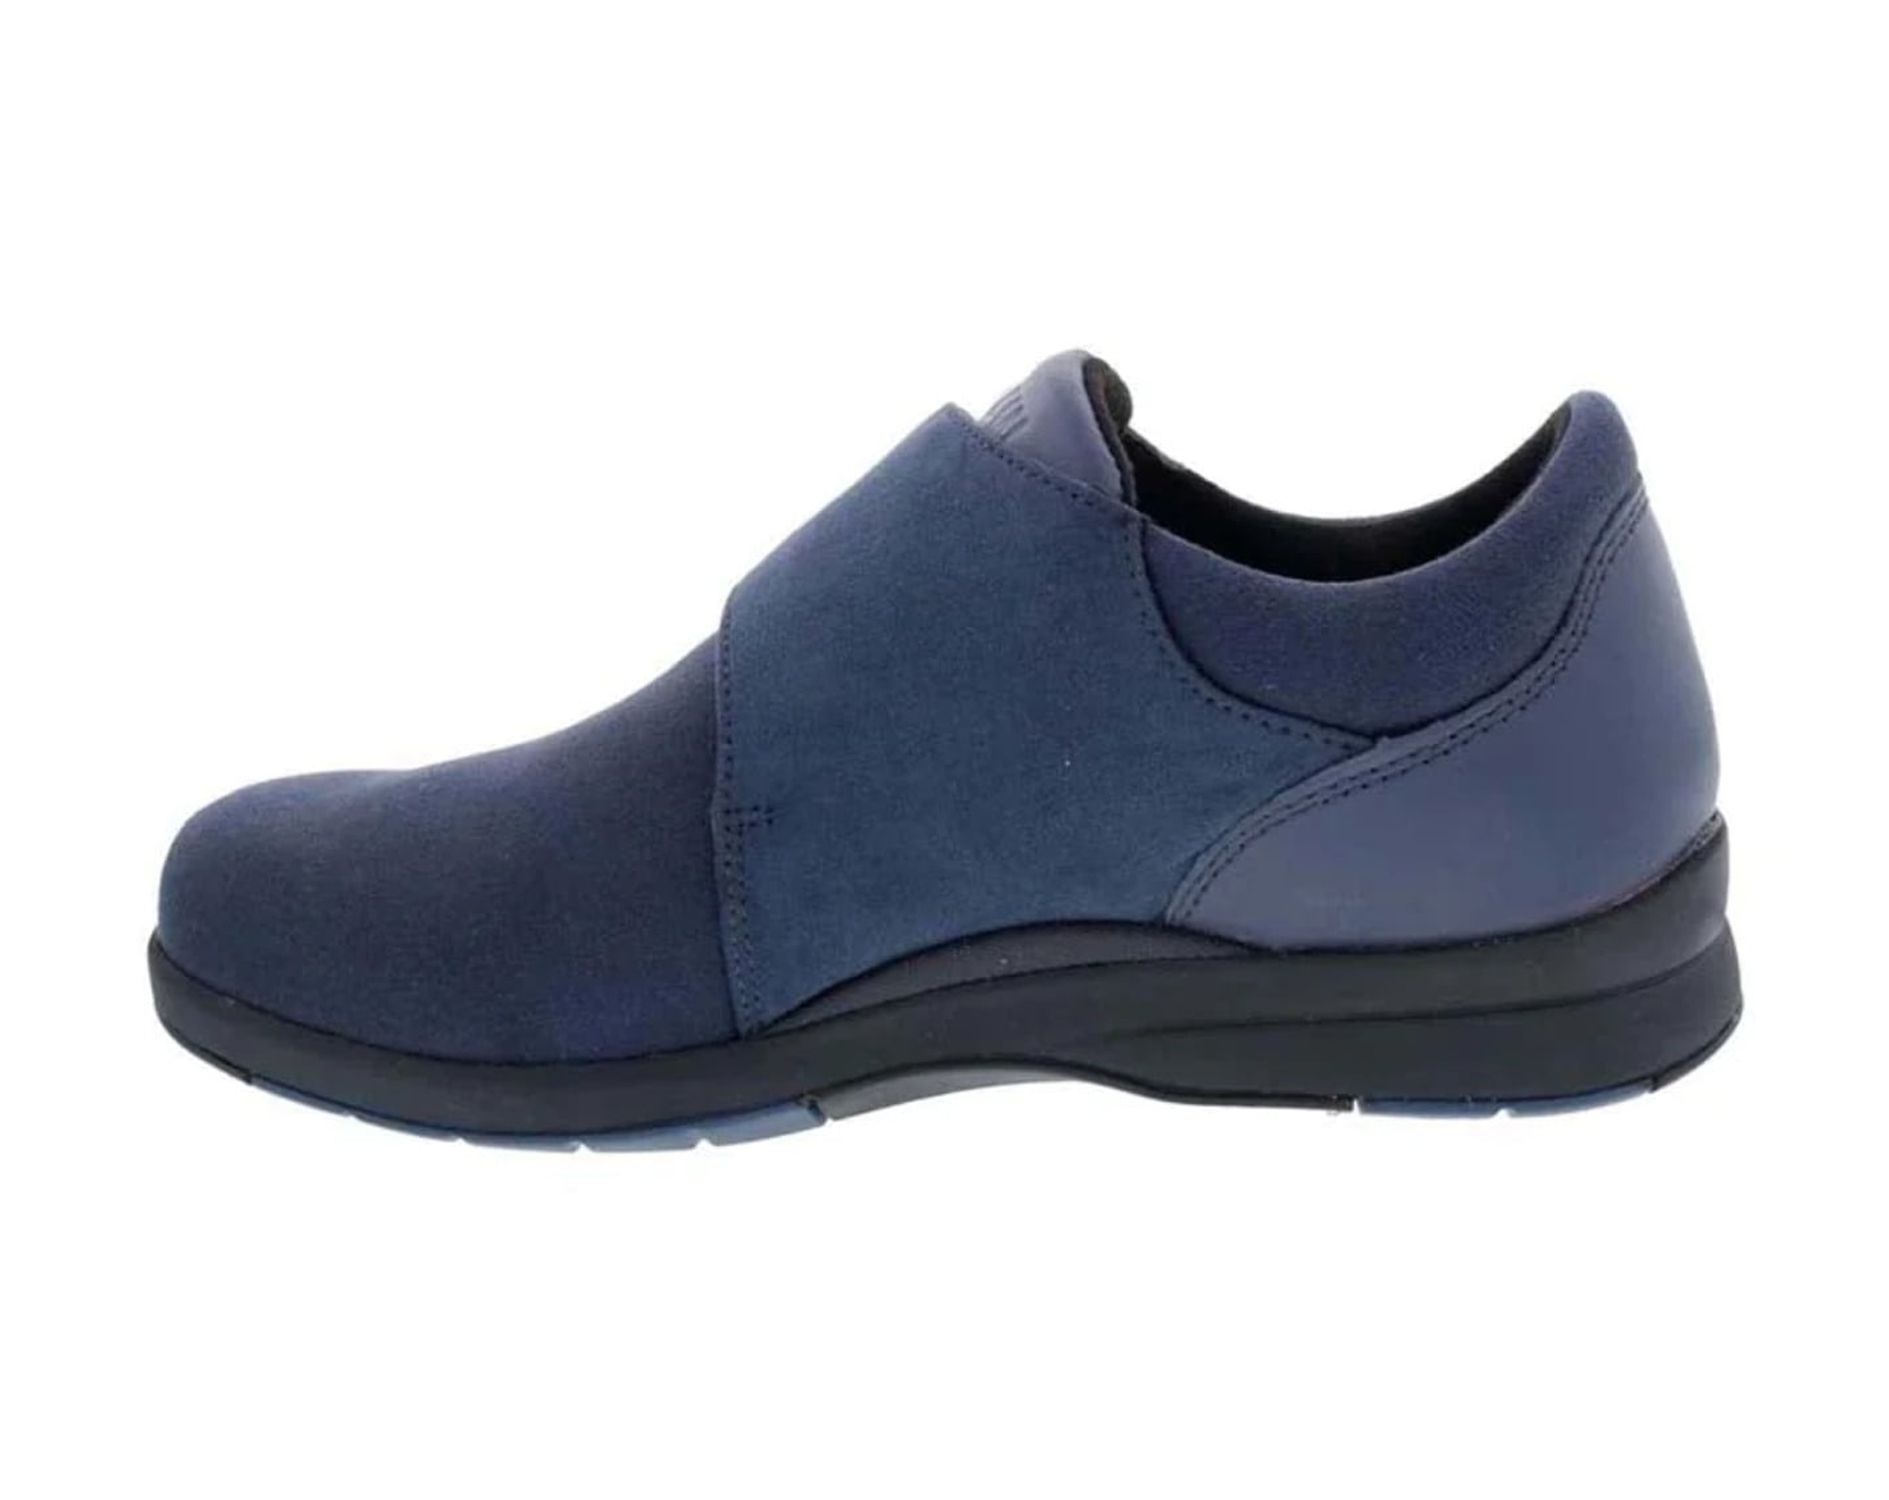 DREW MOONWALK WOMEN CASUAL SHOE IN NAVY STRETCH LEATHER - image 2 of 4